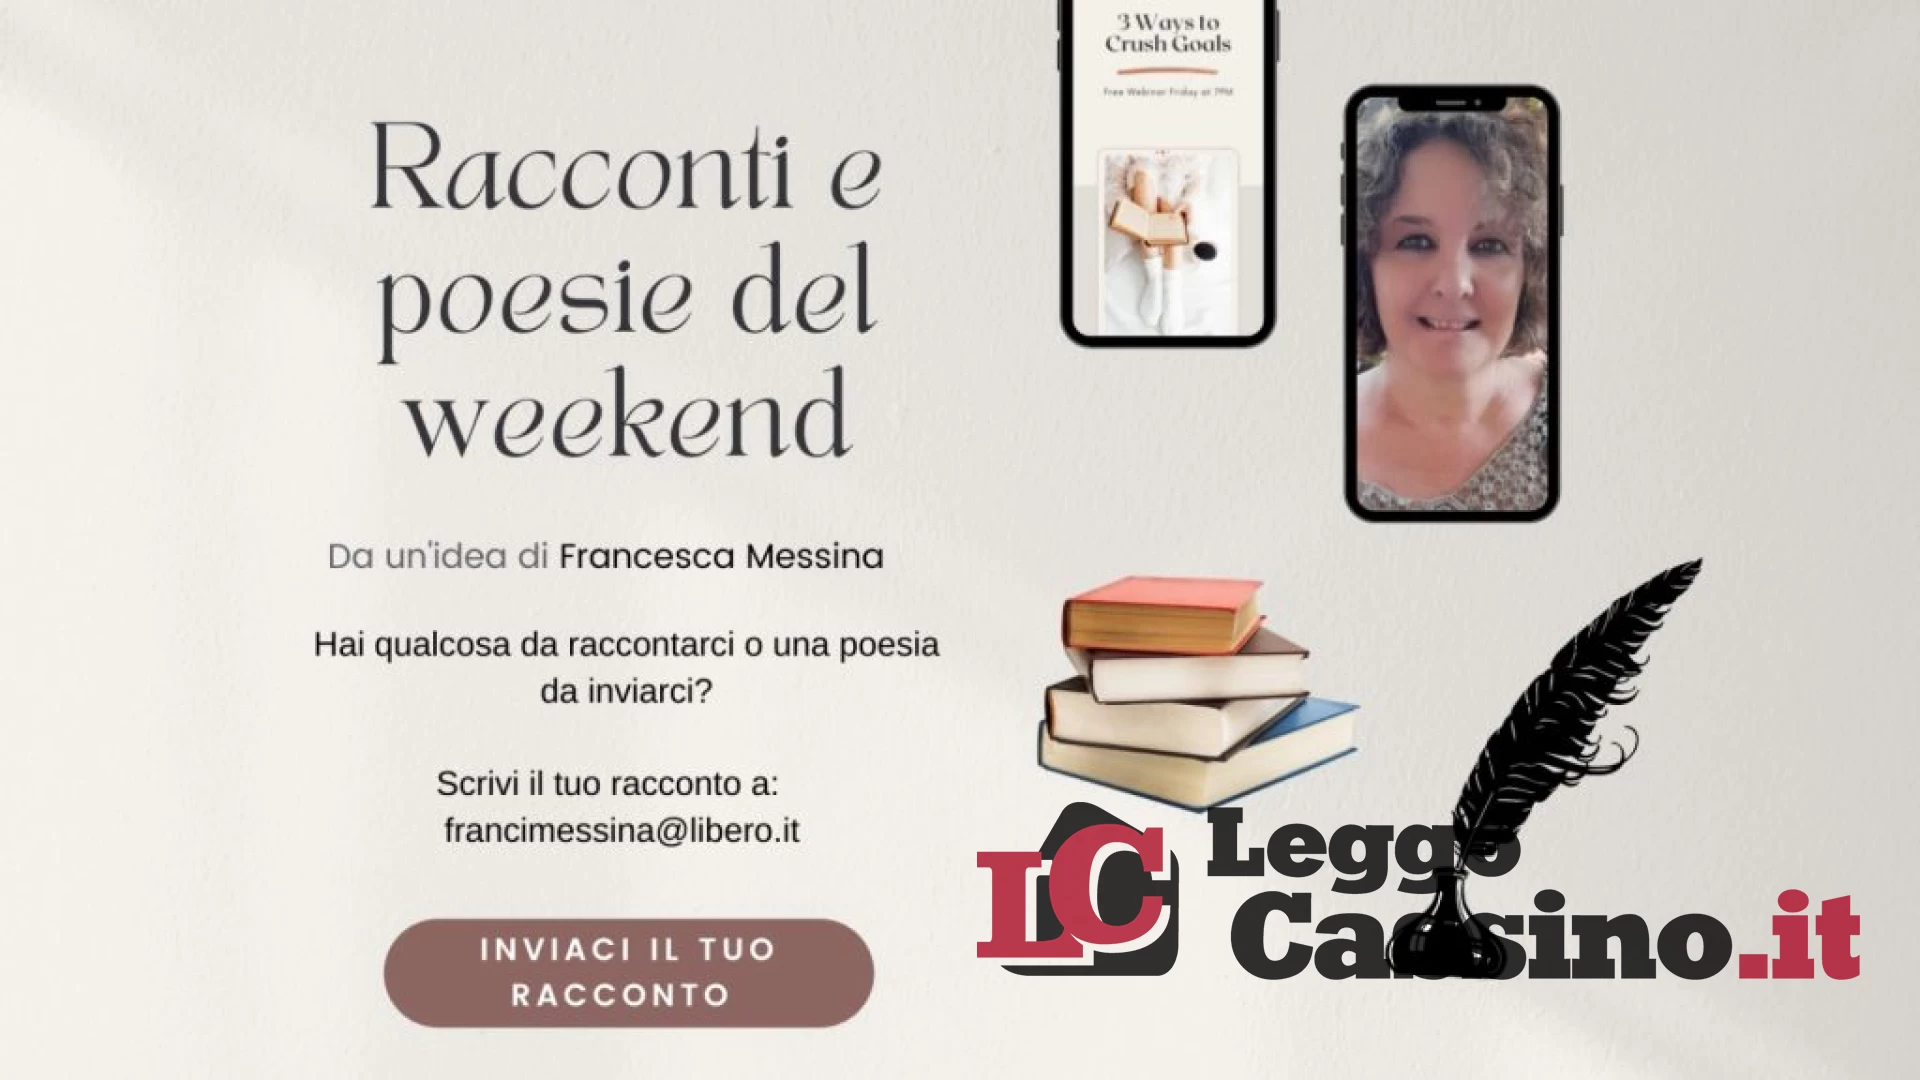 Racconti e Poesie del weekend - "L'Amore"